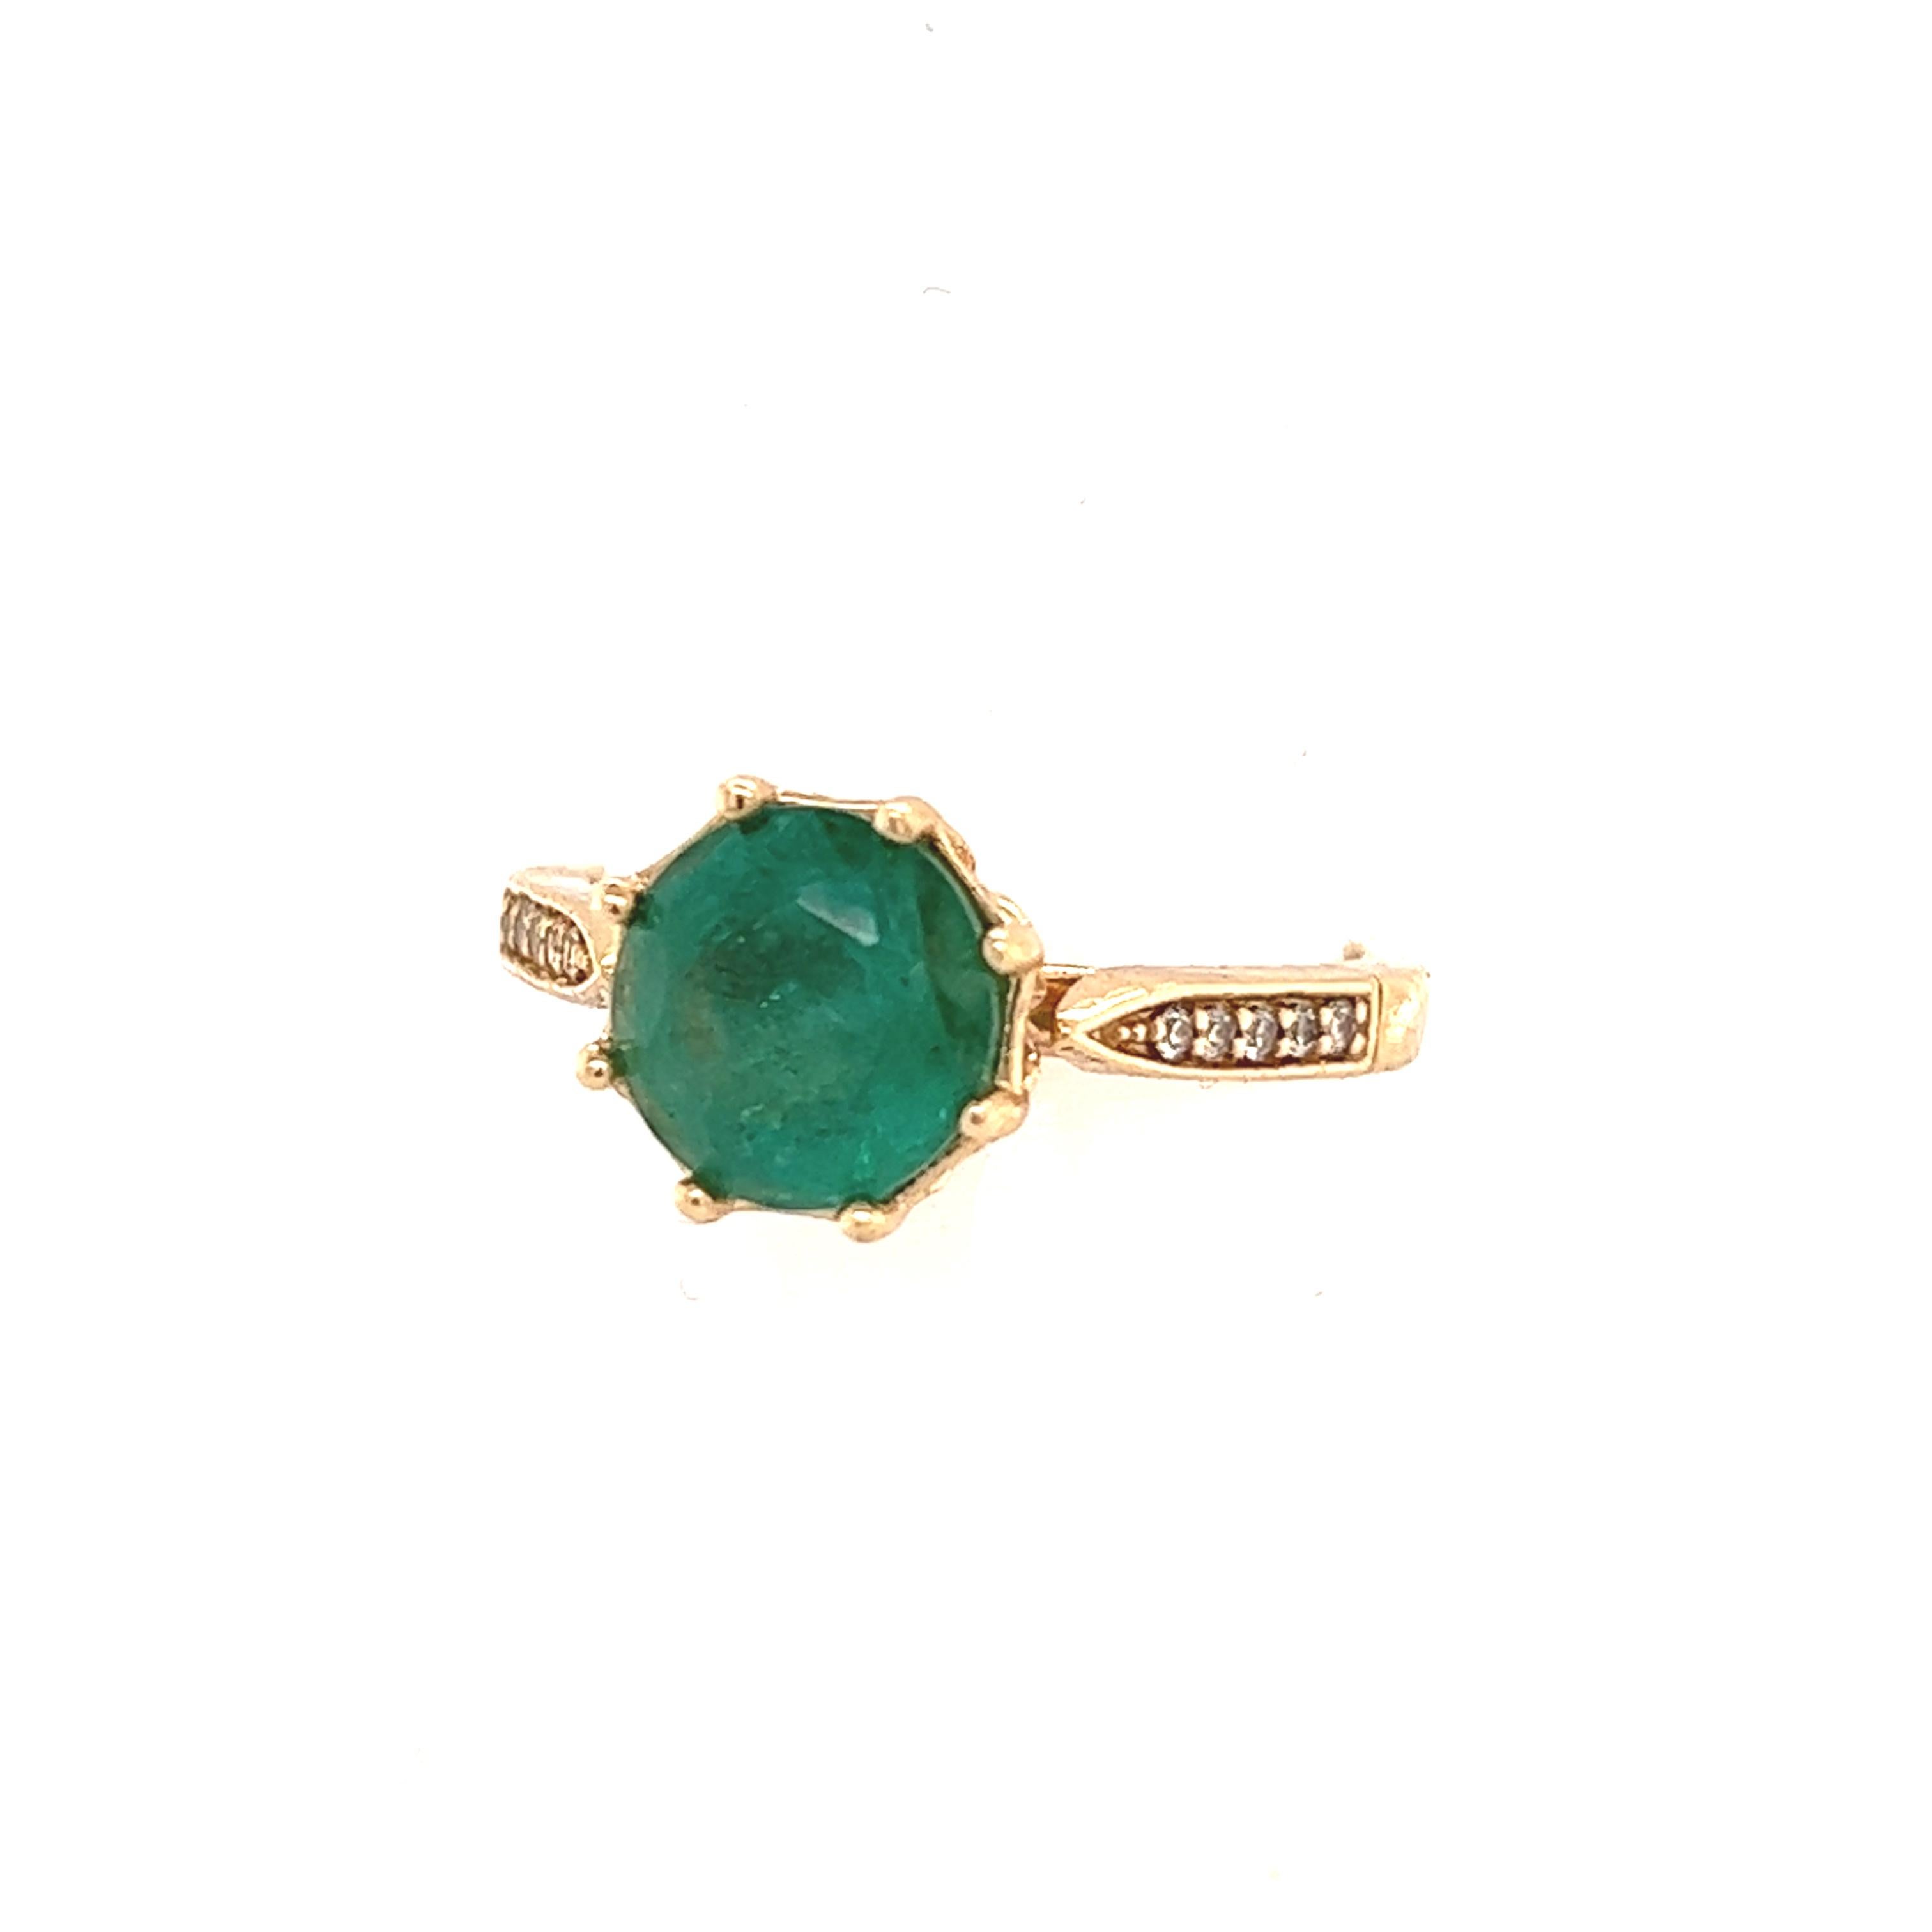 Round Cut Natural Emerald Diamond Ring 14k Gold 1.94 TCW Certified